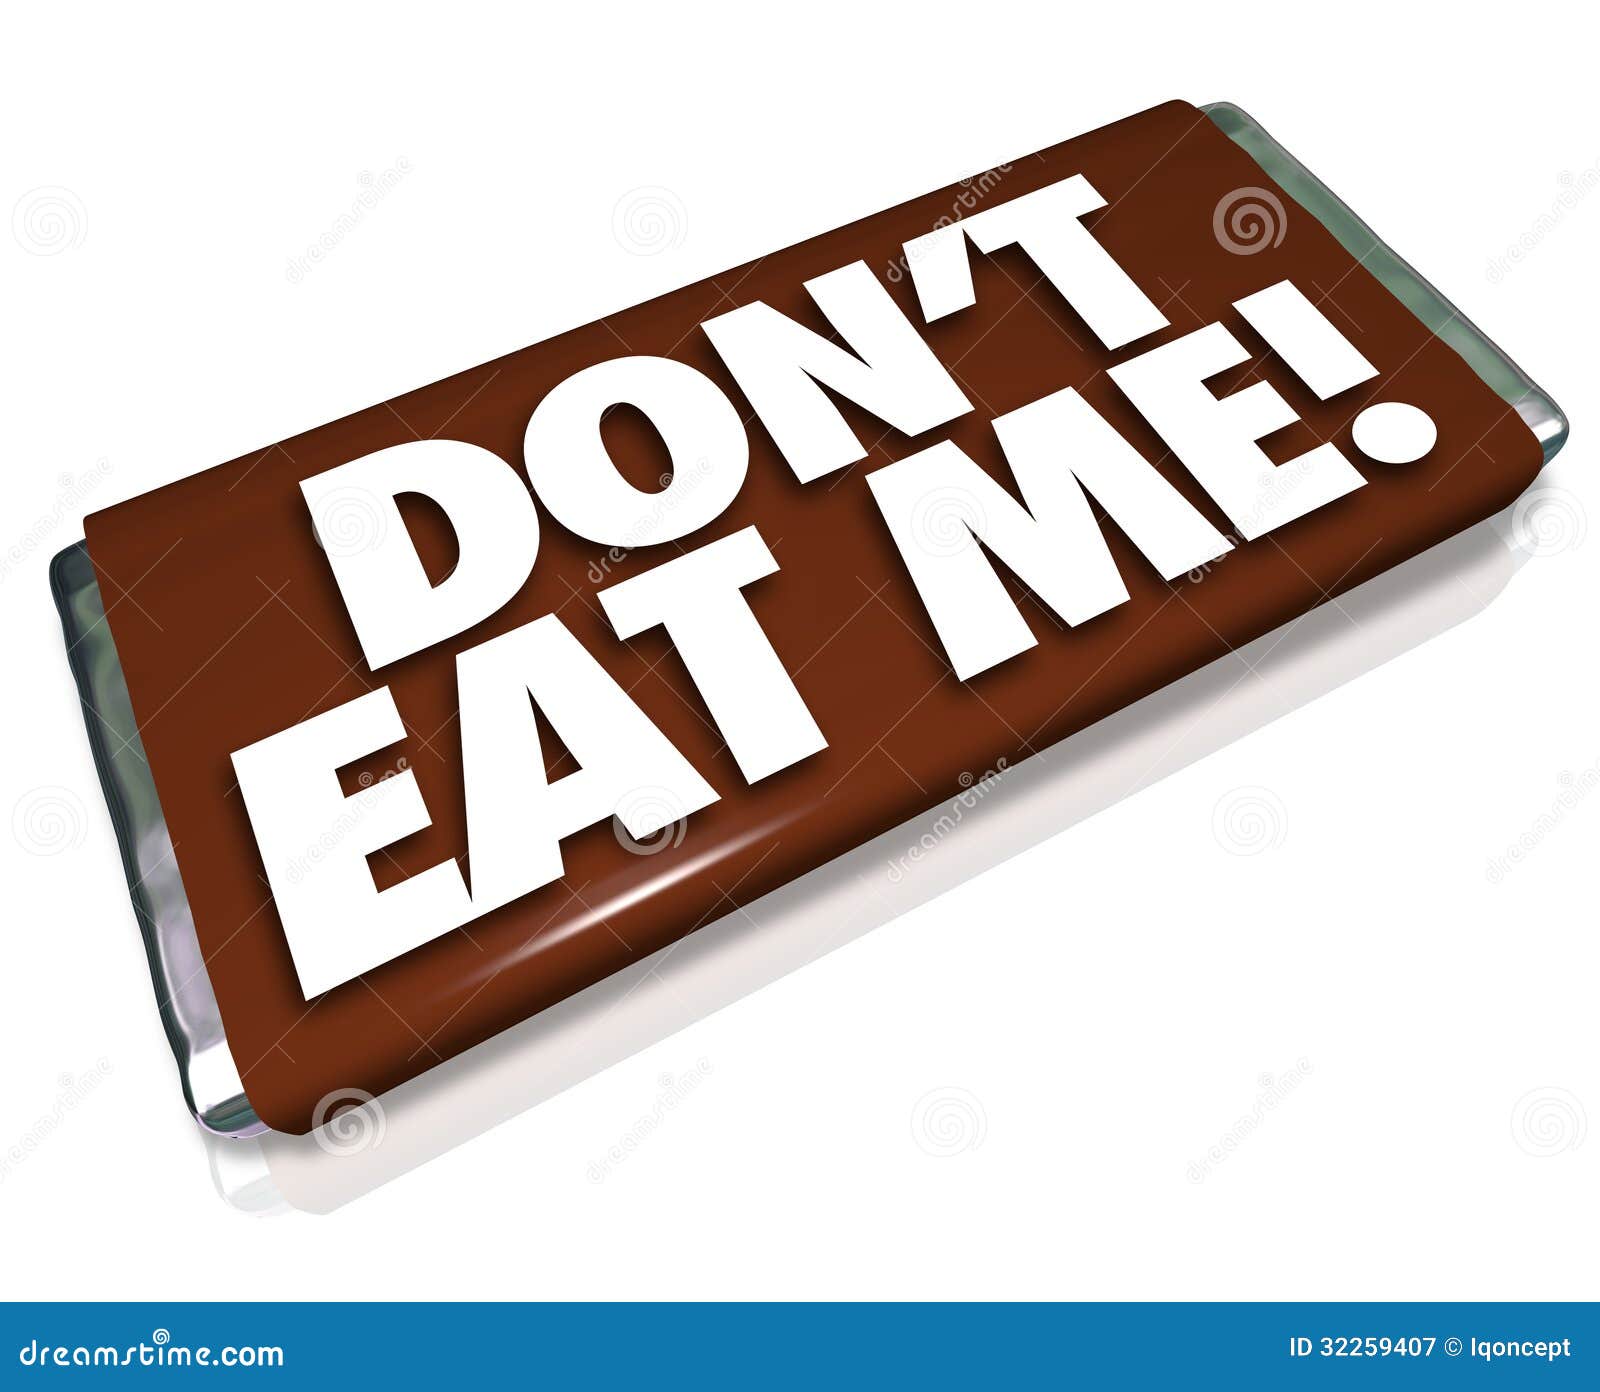 Don't Eat Me Words Chocolate Candy Bar Unhealthy Junk Food Royalty Free